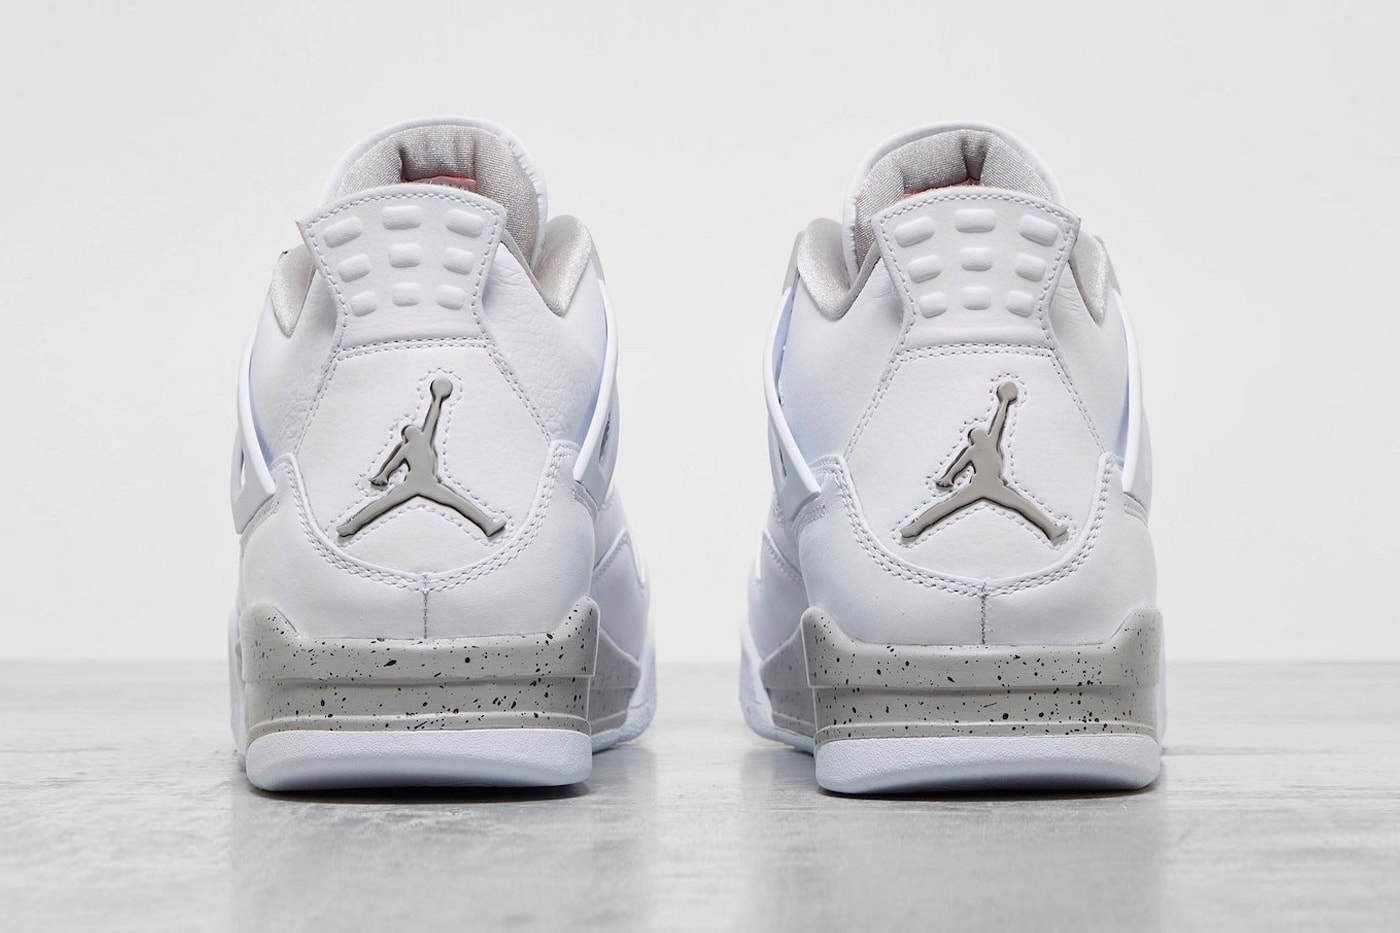 Air Jordan 4 White Oreo Another Look Shoebox Release Info ct8527-100 Buy Price Date 